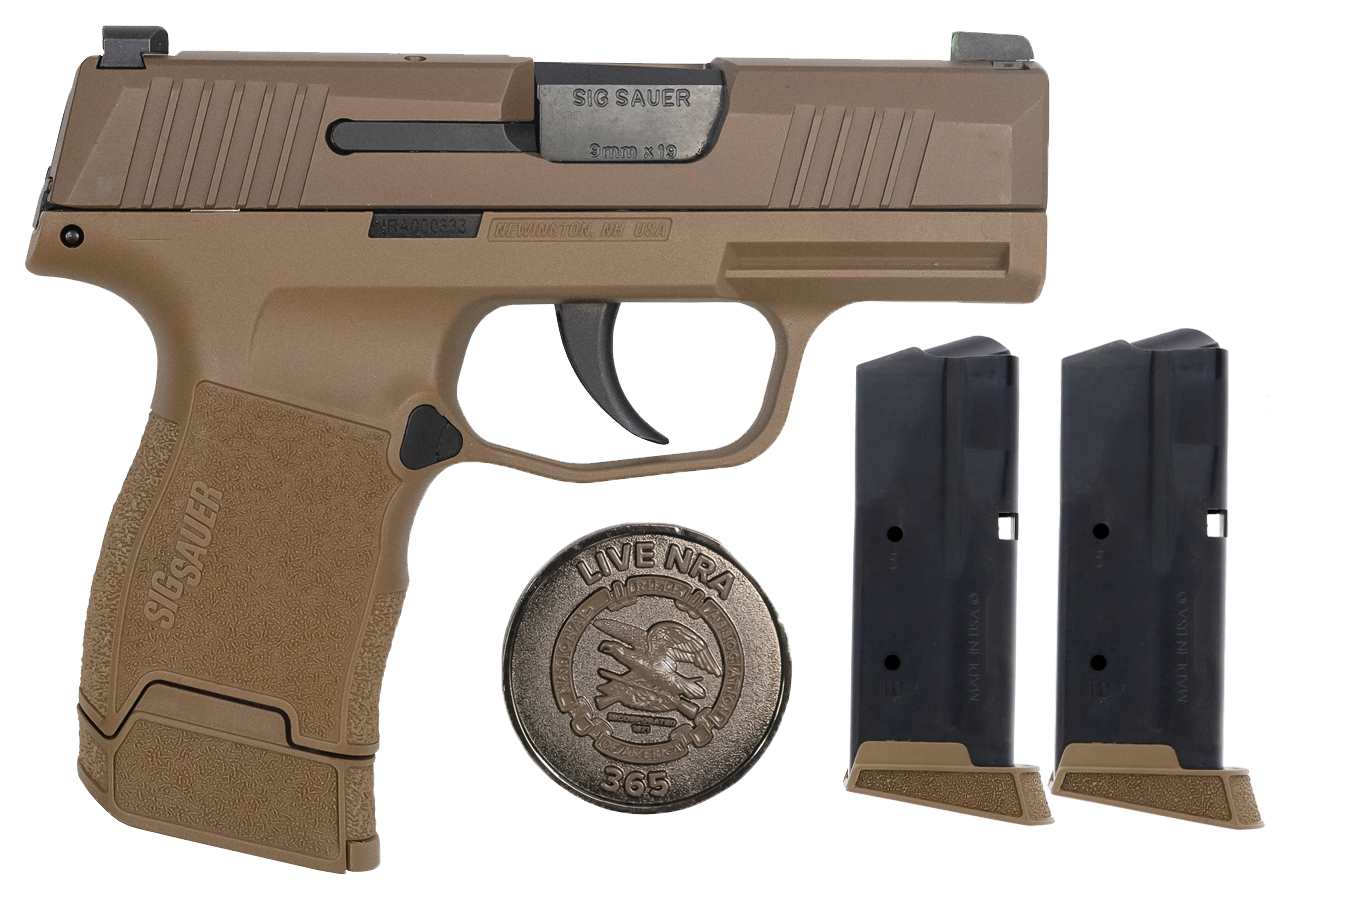 No. 4 Best Selling: SIG SAUER P365 9MM COYOTE TAN NRA SPECIAL EDITION PISTOL